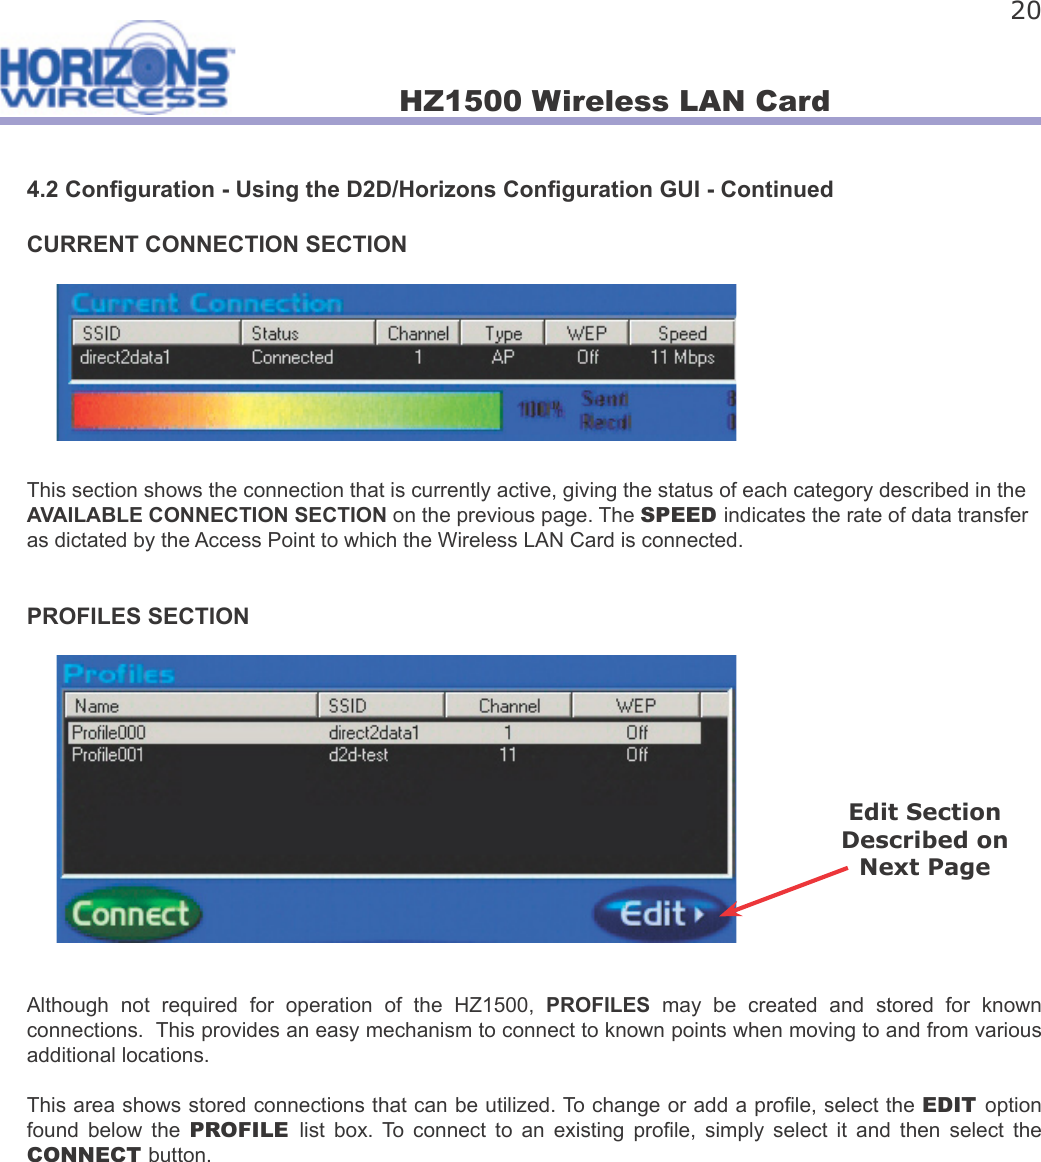 HZ1500 Wireless LAN Card 204.2 Con guration - Using the D2D/Horizons Con guration GUI - ContinuedCURRENT CONNECTION SECTIONThis section shows the connection that is currently active, giving the status of each category described in the AVAILABLE CONNECTION SECTION on the previous page. The SPEED indicates the rate of data transfer as dictated by the Access Point to which the Wireless LAN Card is connected.PROFILES SECTIONAlthough  not  required  for  operation  of  the  HZ1500,  PROFILES  may  be  created  and  stored  for  known connections.  This provides an easy mechanism to connect to known points when moving to and from various additional locations. This area shows stored connections that can be utilized. To change or add a pro le, select the EDIT option found  below  the  PROFILE  list  box.  To  connect  to  an  existing  pro le,  simply  select  it  and  then  select  the CONNECT button. Edit Section Described on Next Page